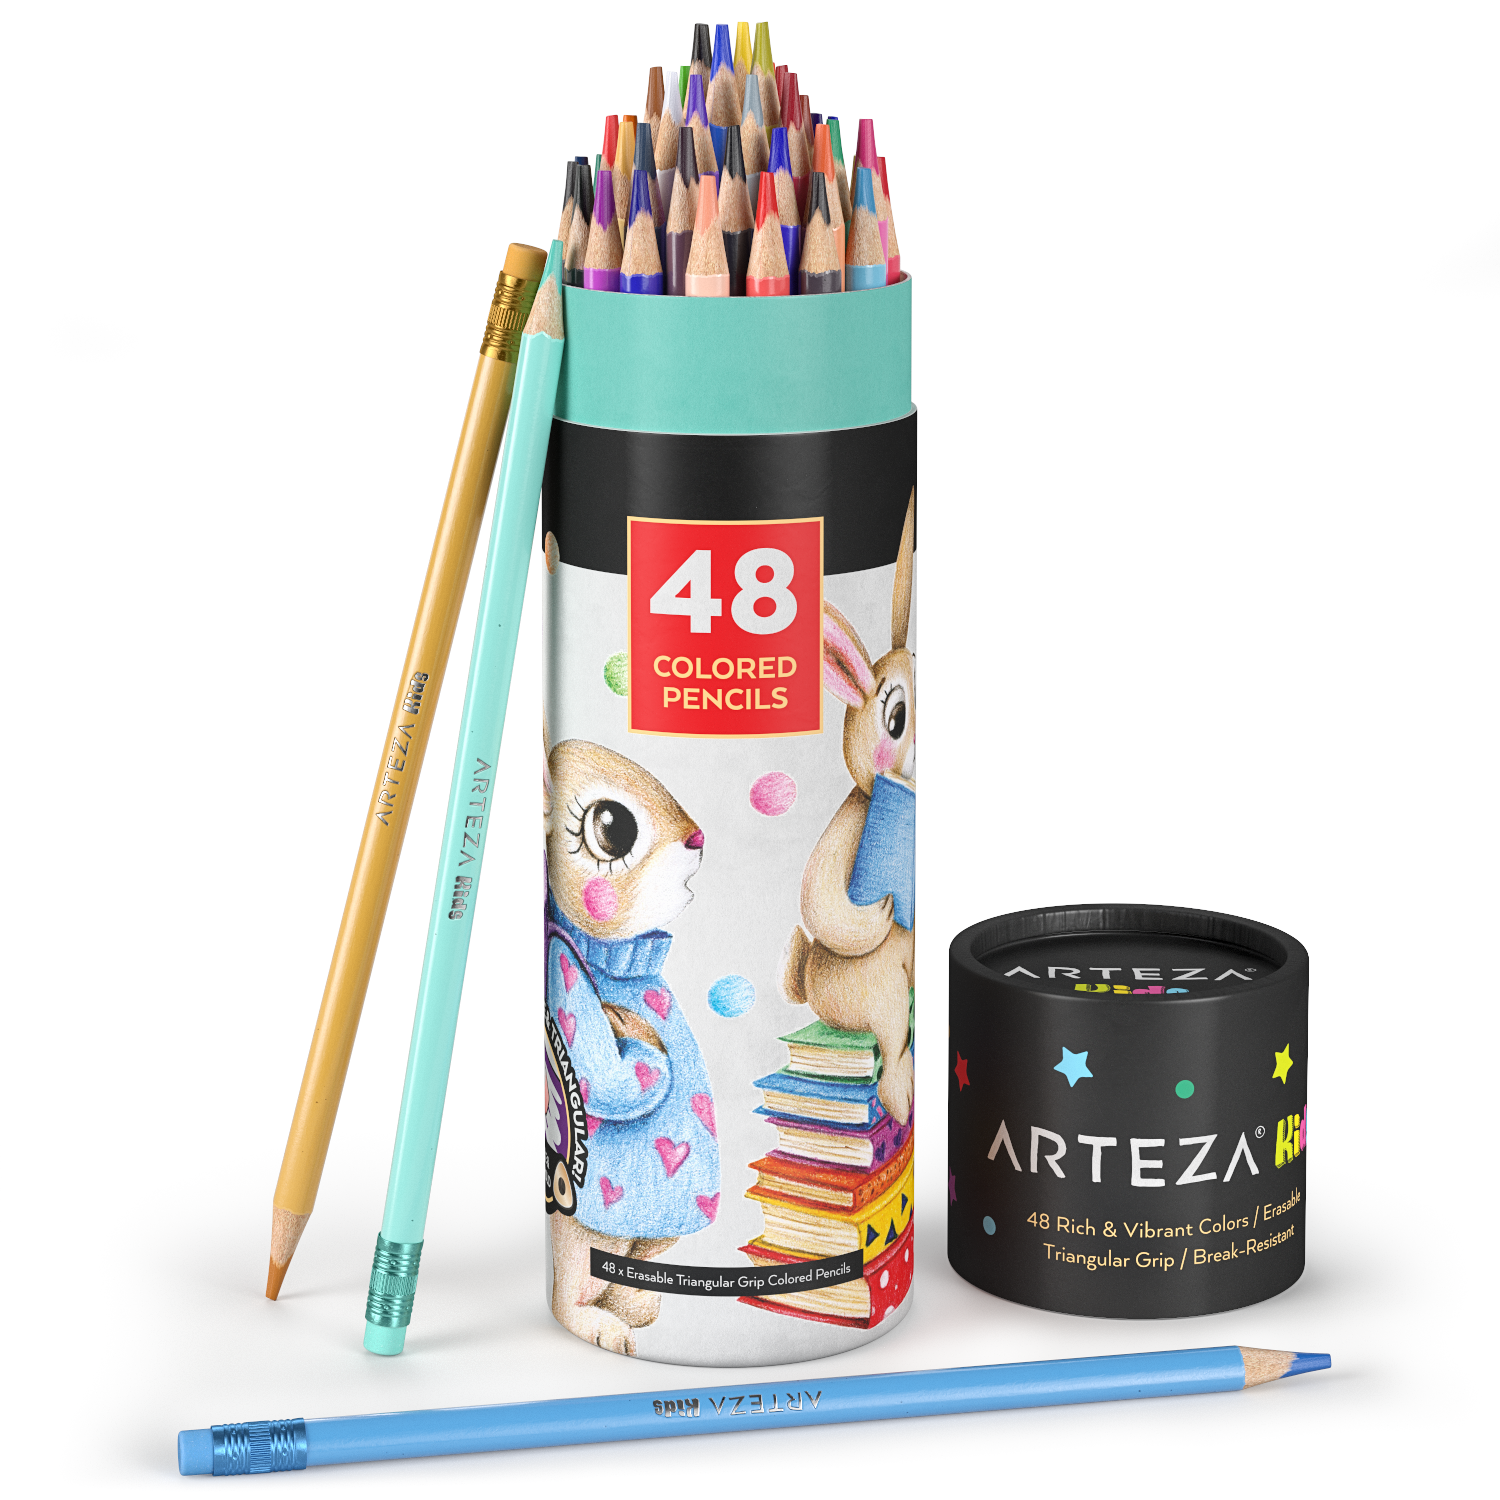 10 Art Supplies to Fuel Your Teen's Creativity - Family Style Schooling